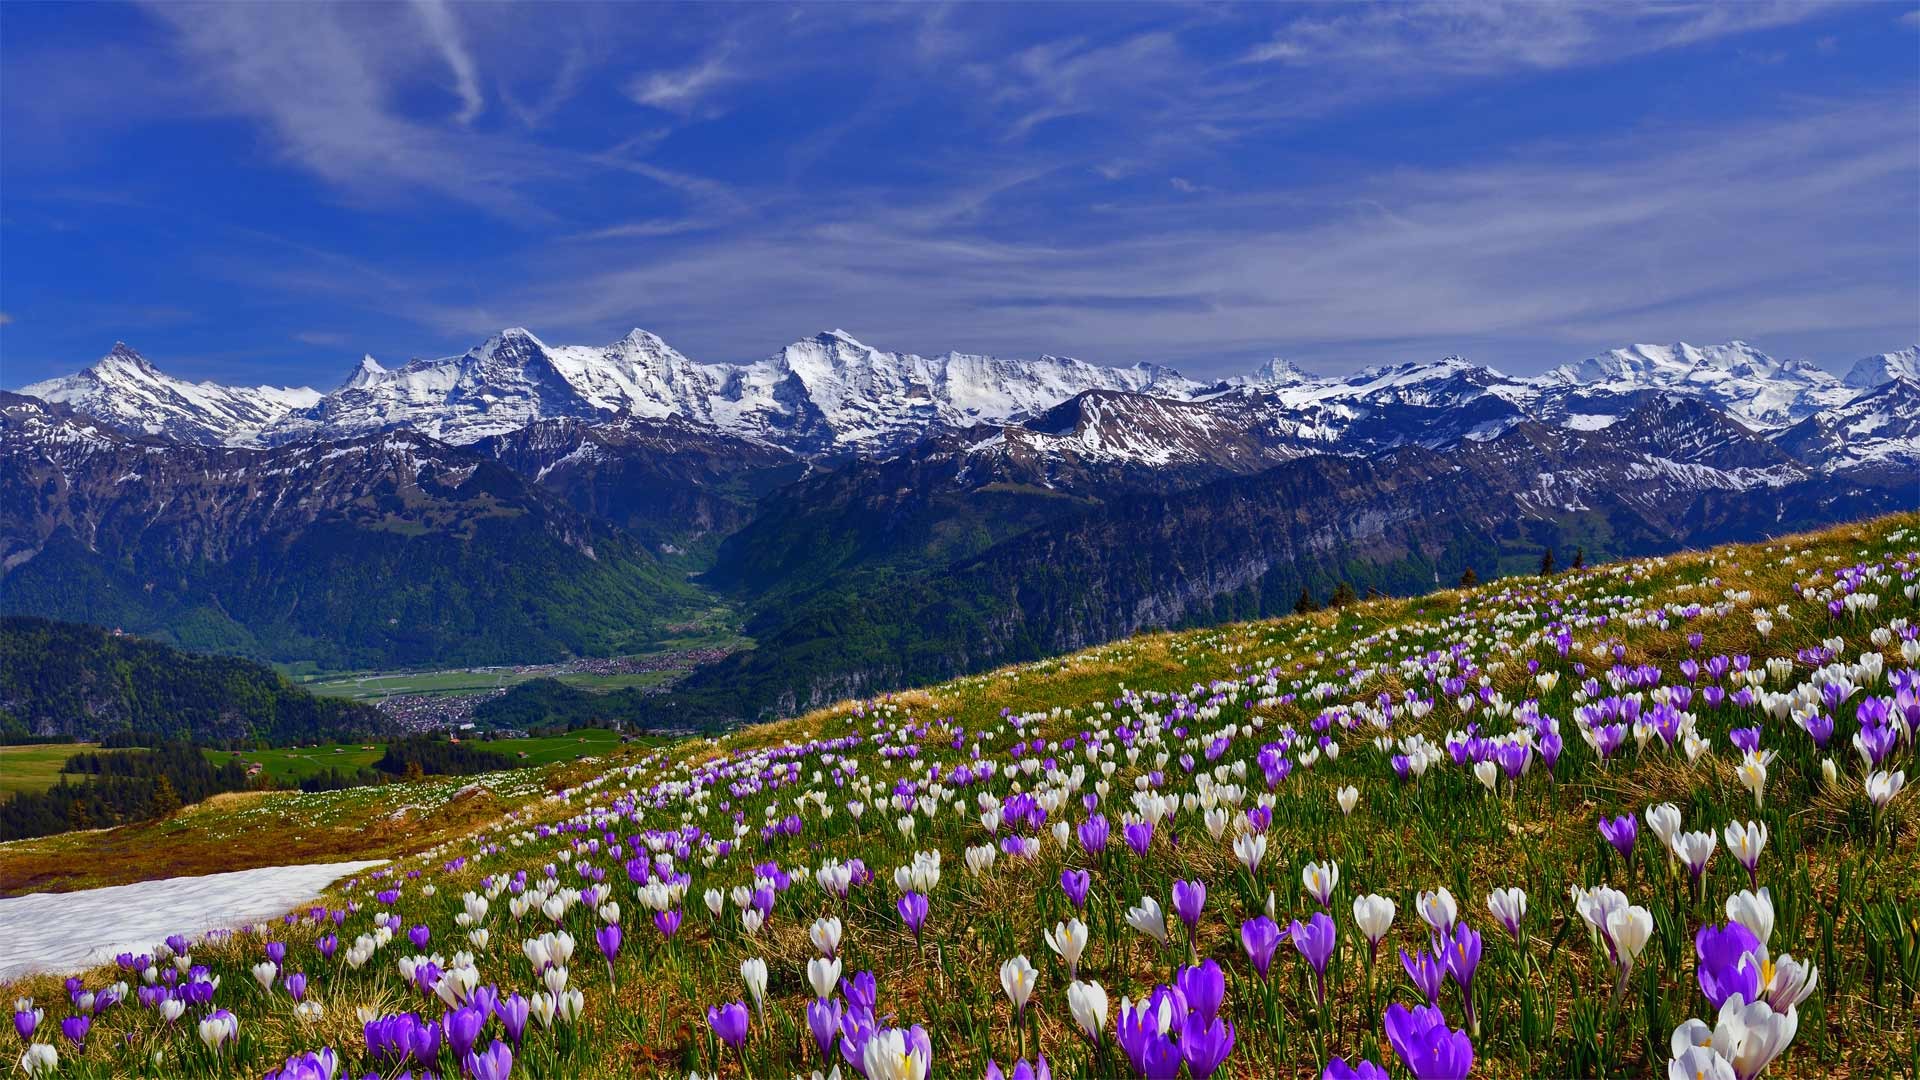 General 1920x1080 Bing photography nature flowers landscape mountains sky field